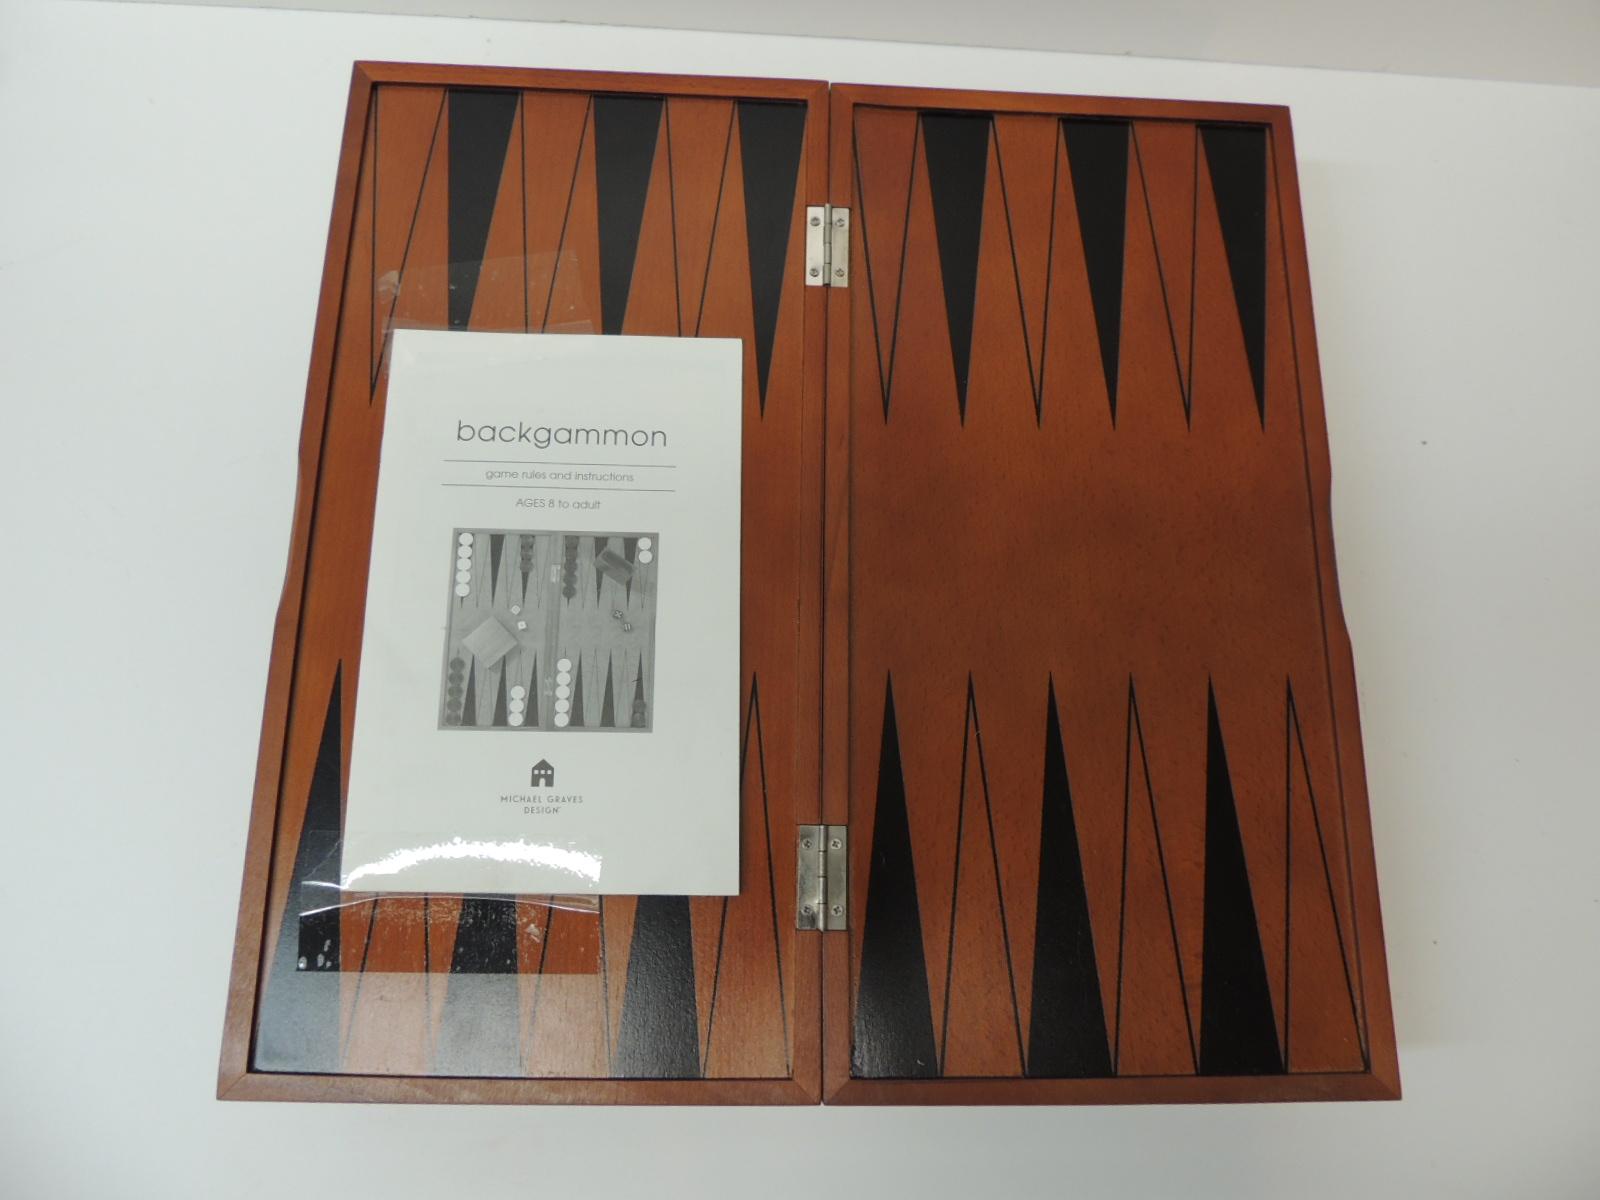 Backgammon board designed by Michael Graves. Imported, circa 2002. Signed with metal tag and includes original box. Beautifully constructed of cherry stained hardwood and veneers. Features legs that fold out to support board and a felt-lined drawer